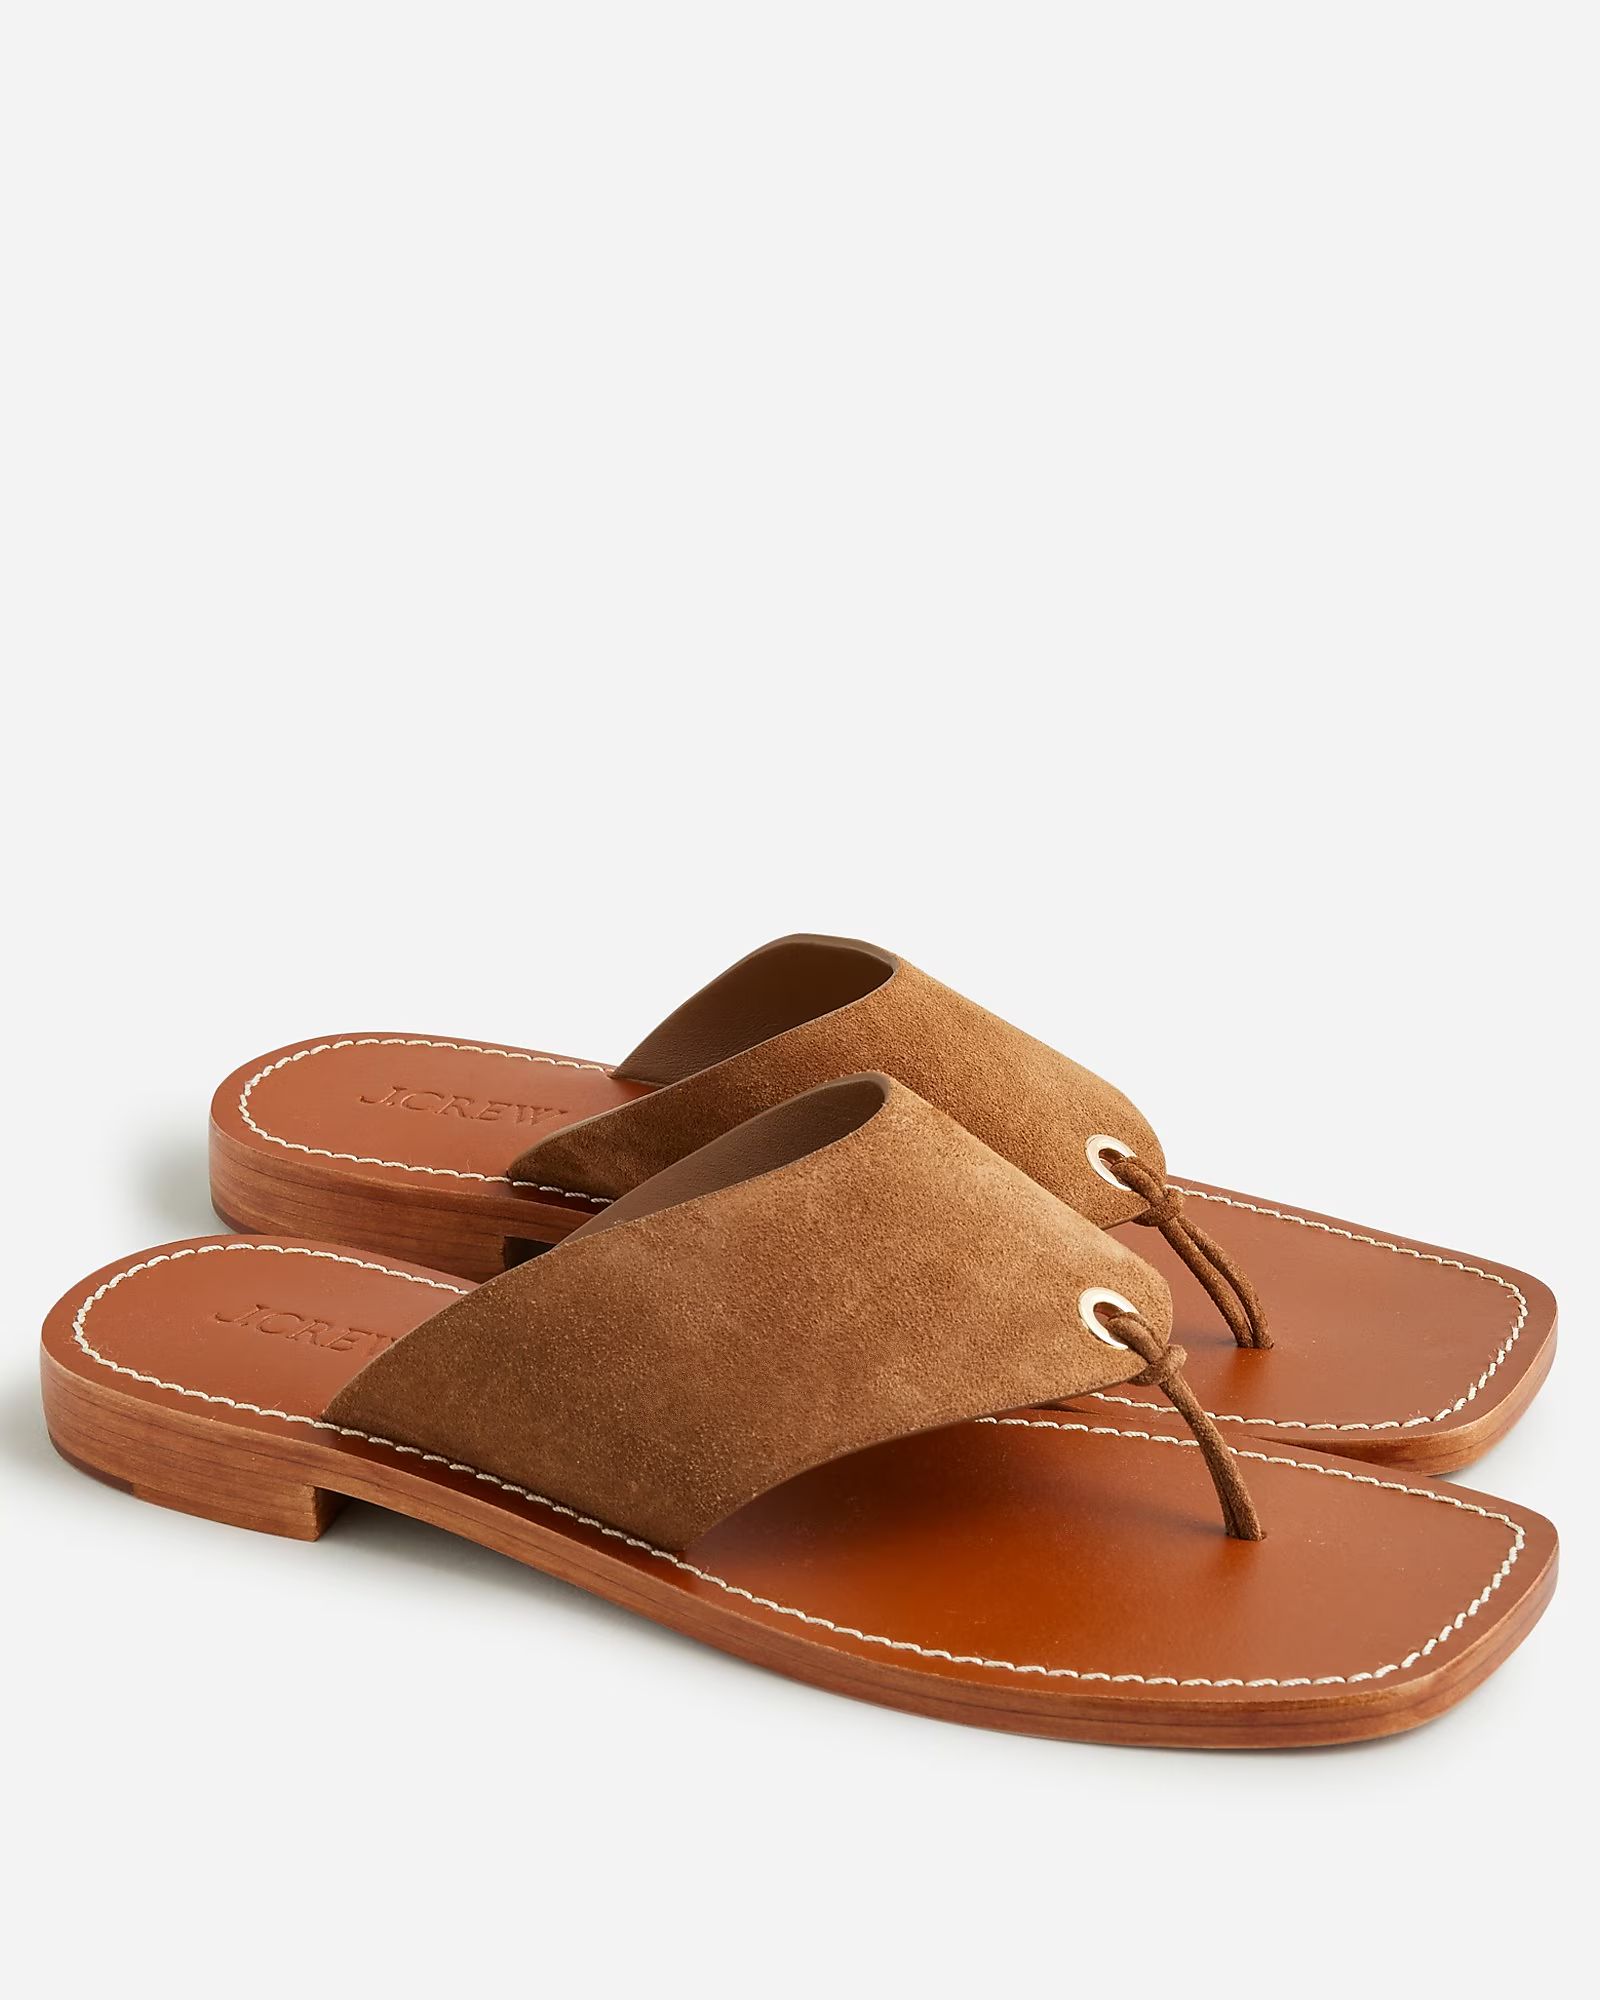 Suede thong sandals | J.Crew US